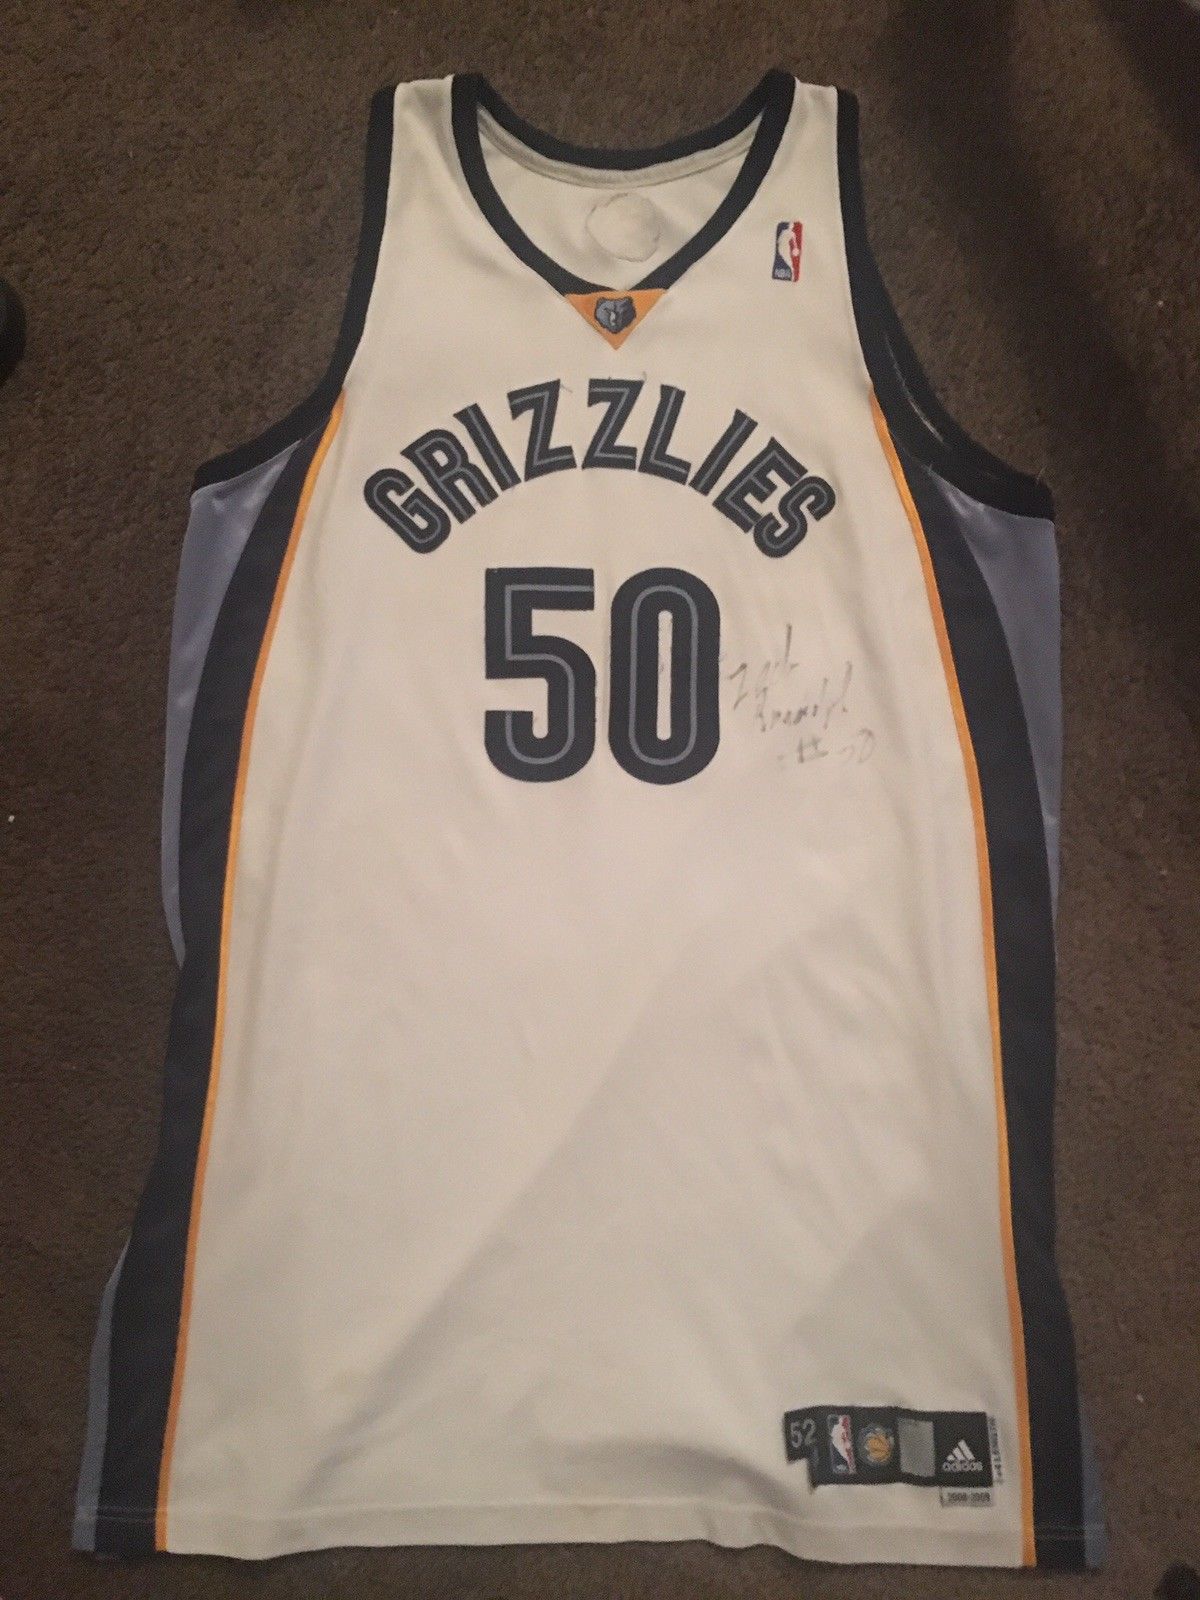 PHOTOMATCHED Zach Randolph 2009-10 Memphis Grizzlies Game worn home jersey